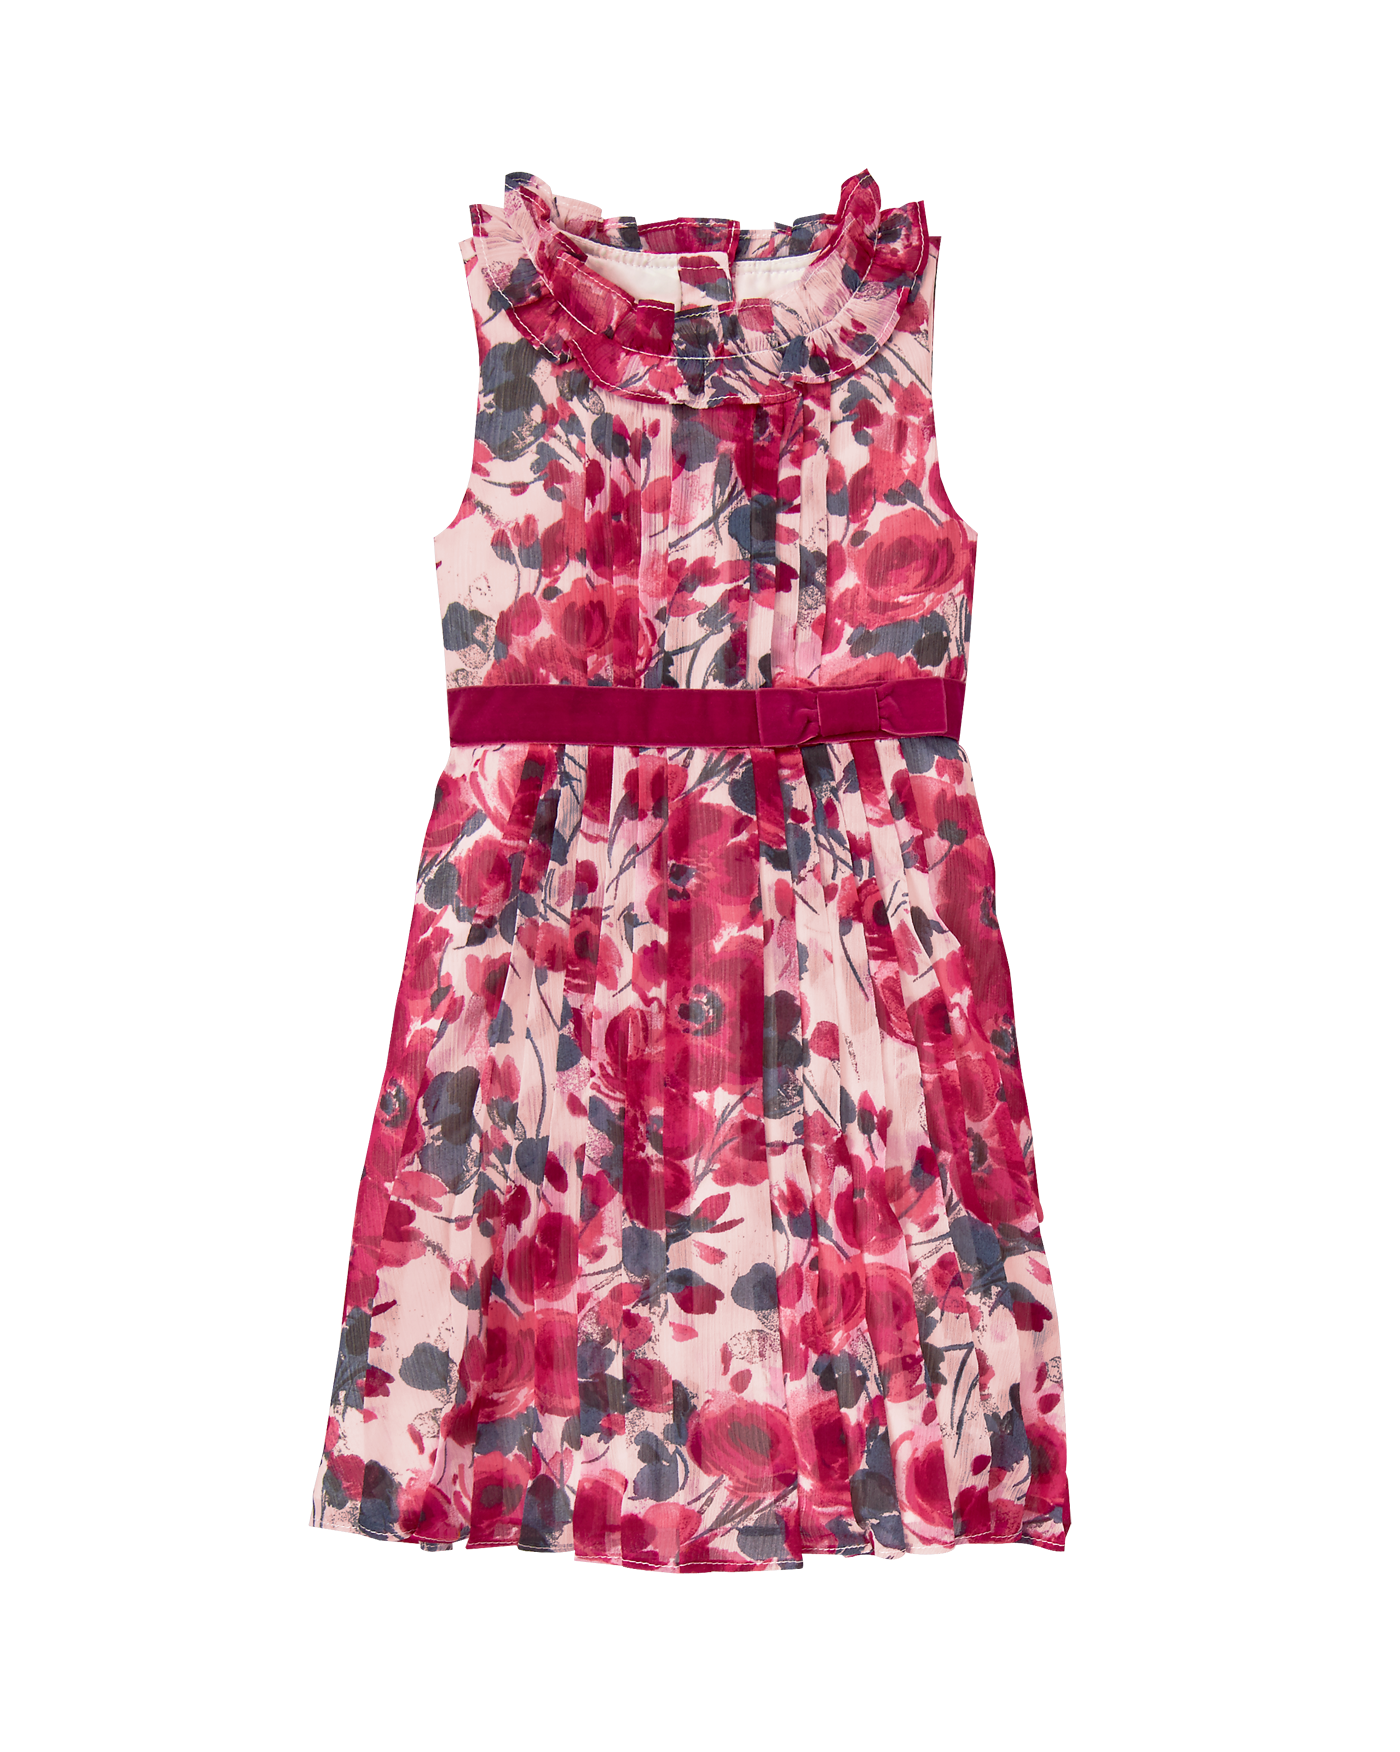 Pleated Floral Dress image number 0